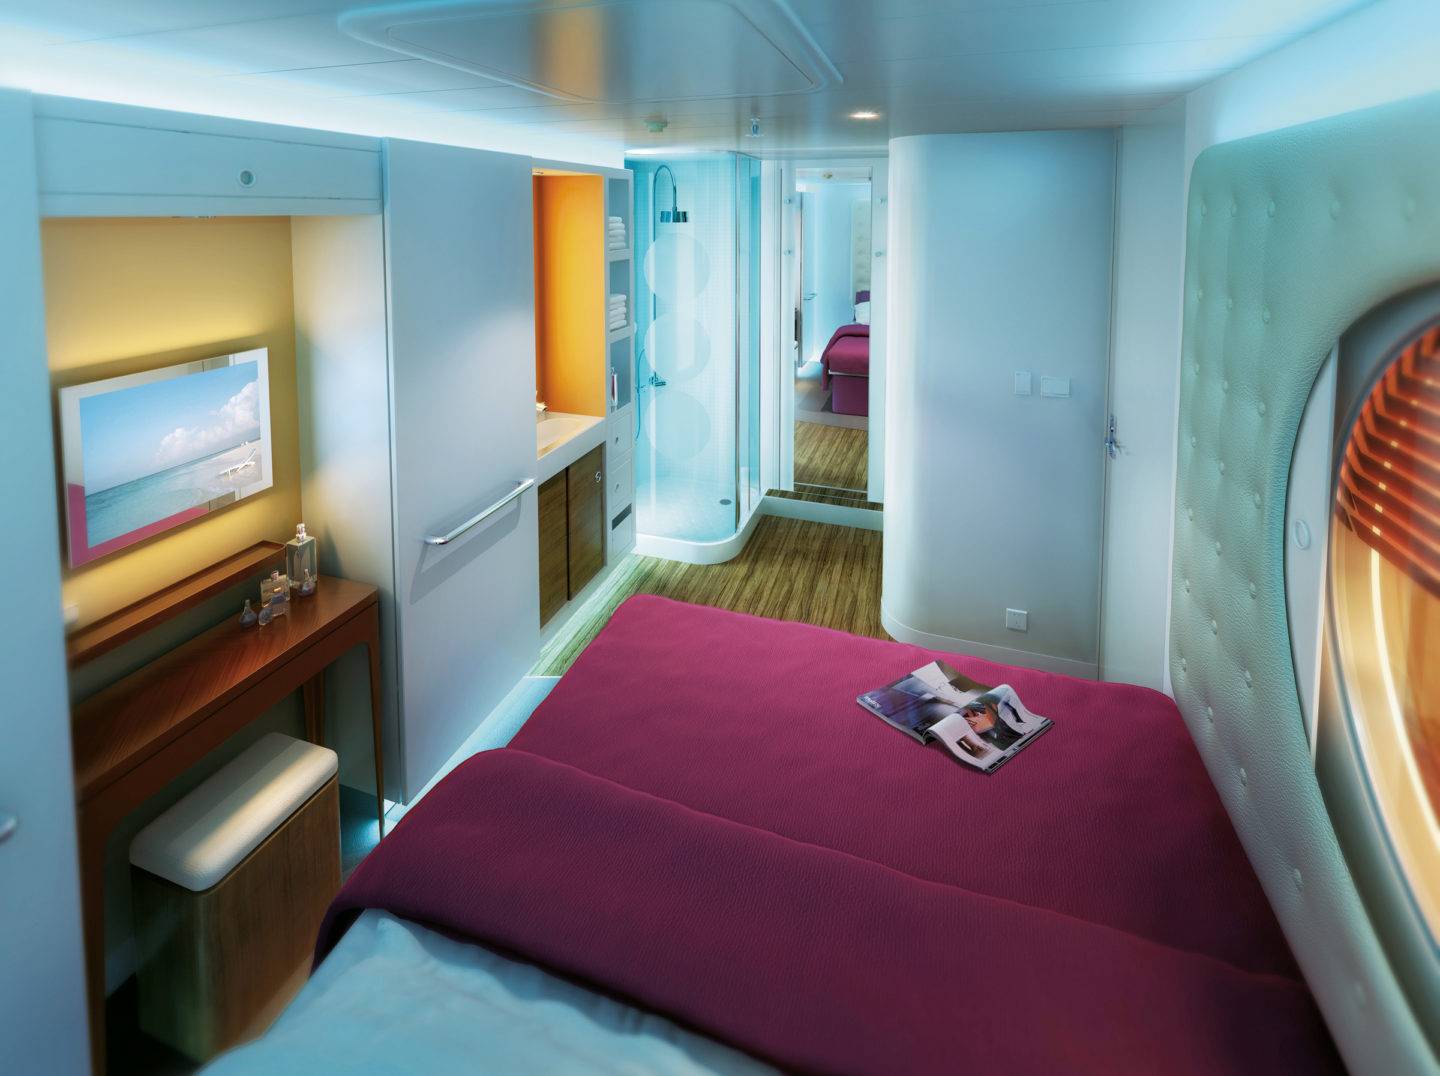 A small compact stateroom featuring a double bed, in a recessed space is a tv, and a narrow table with a stoor, a padded wall on one side has a large circular window. A sink and shower can be seen in the back of the room